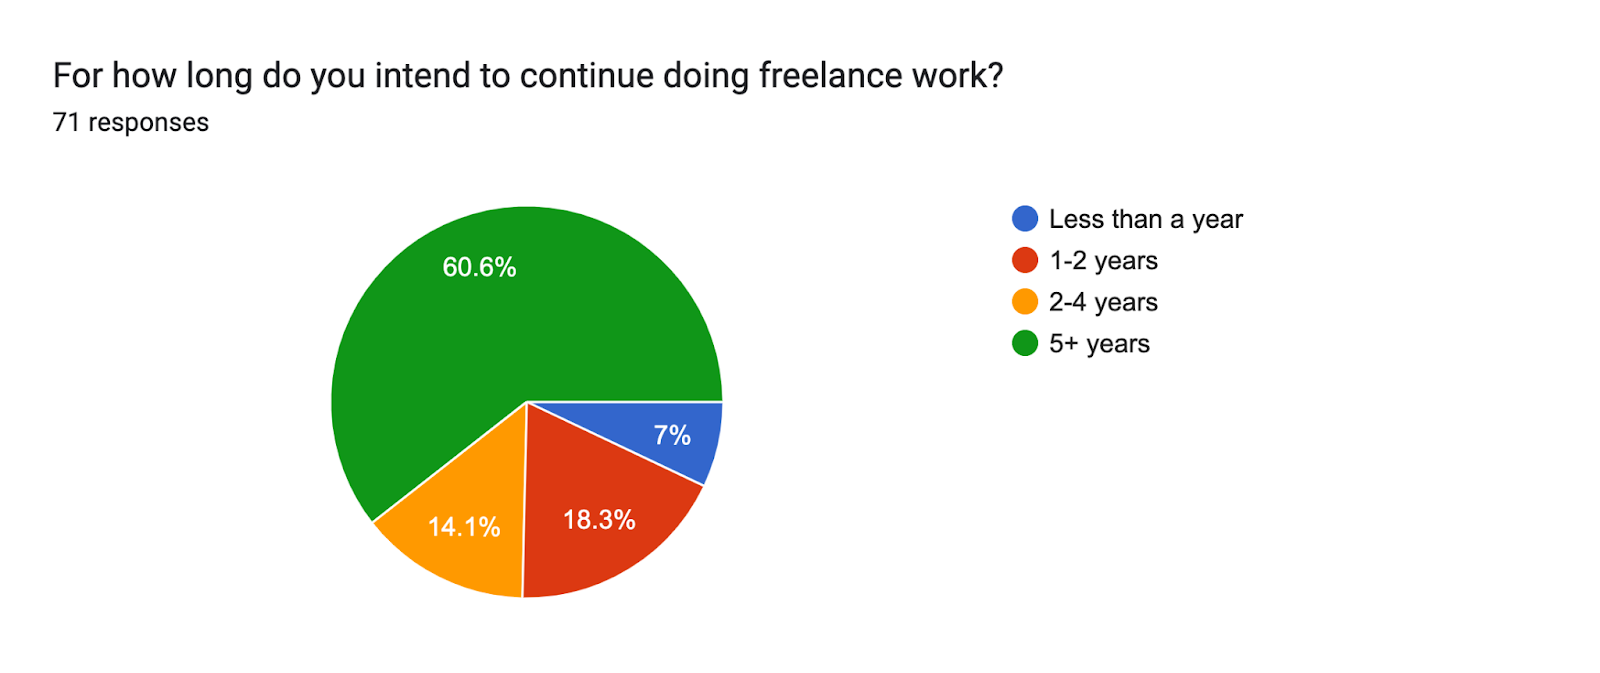 Forms response chart. Question title: For how long do you intend to continue doing freelance work?. Number of responses: 71 responses.